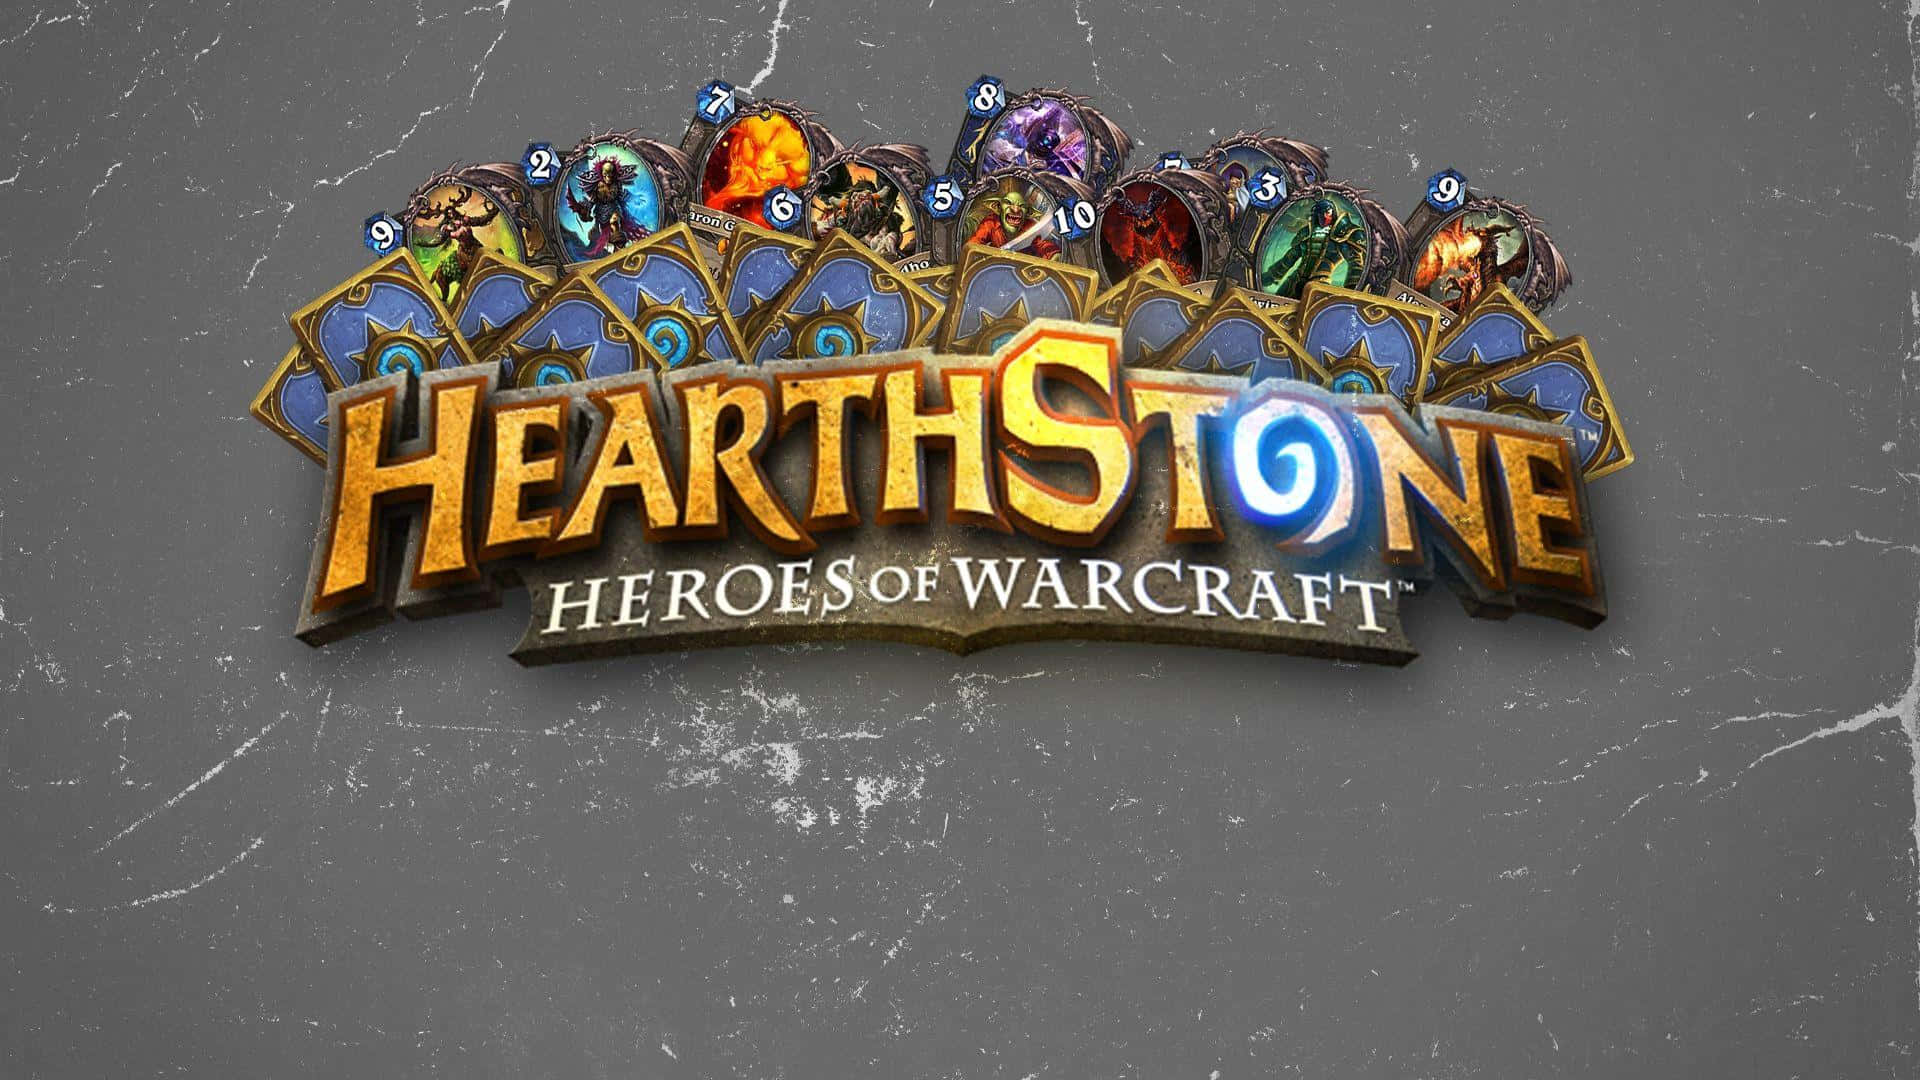 Discover your Hearthstone adventure!